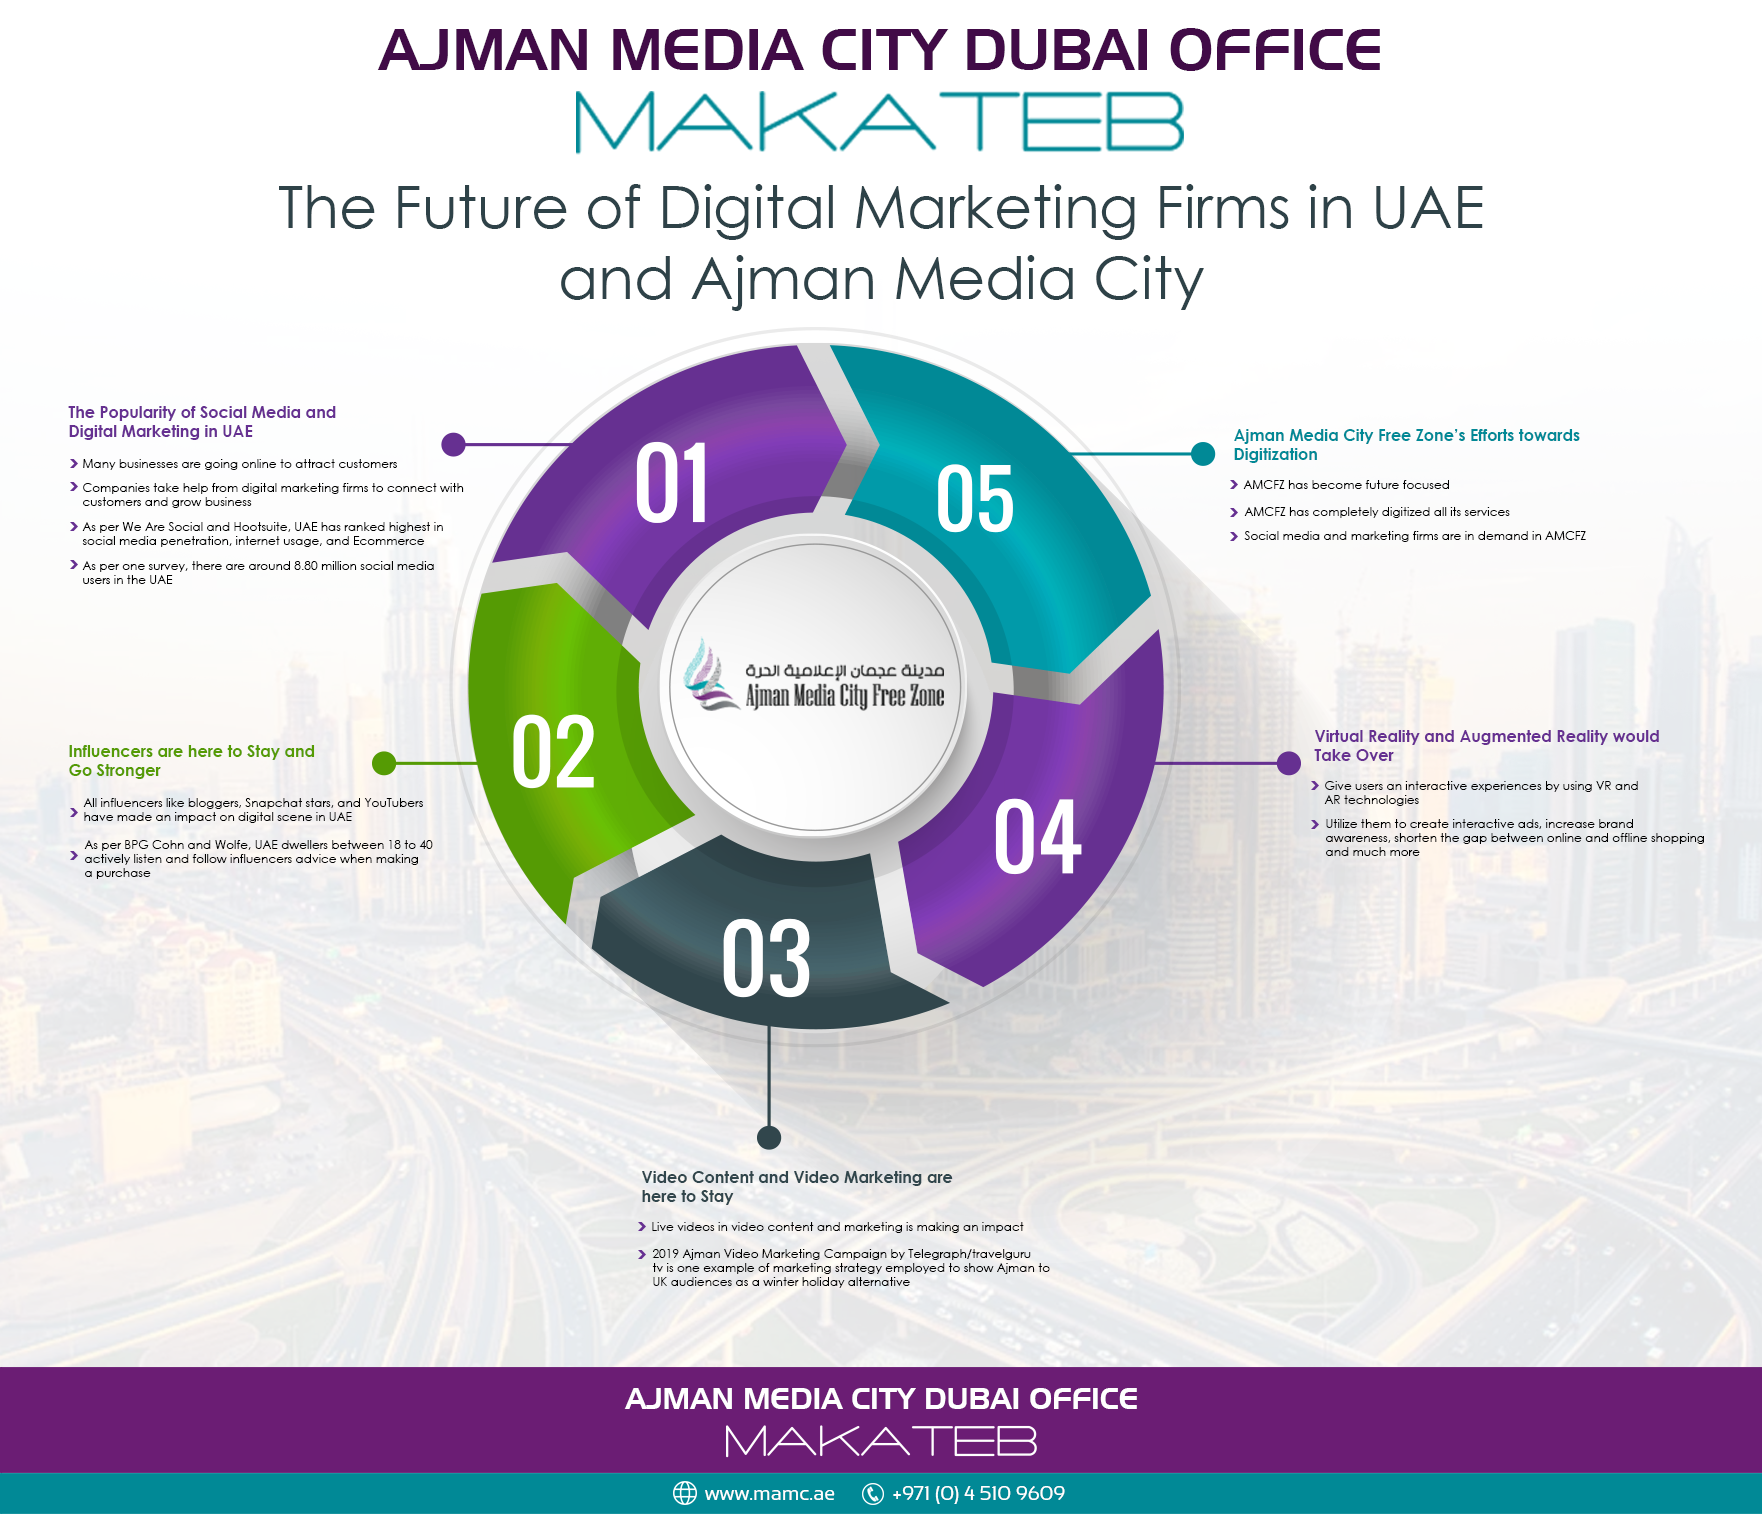 The Future of Digital Marketing Firms in UAE and Ajman Media City